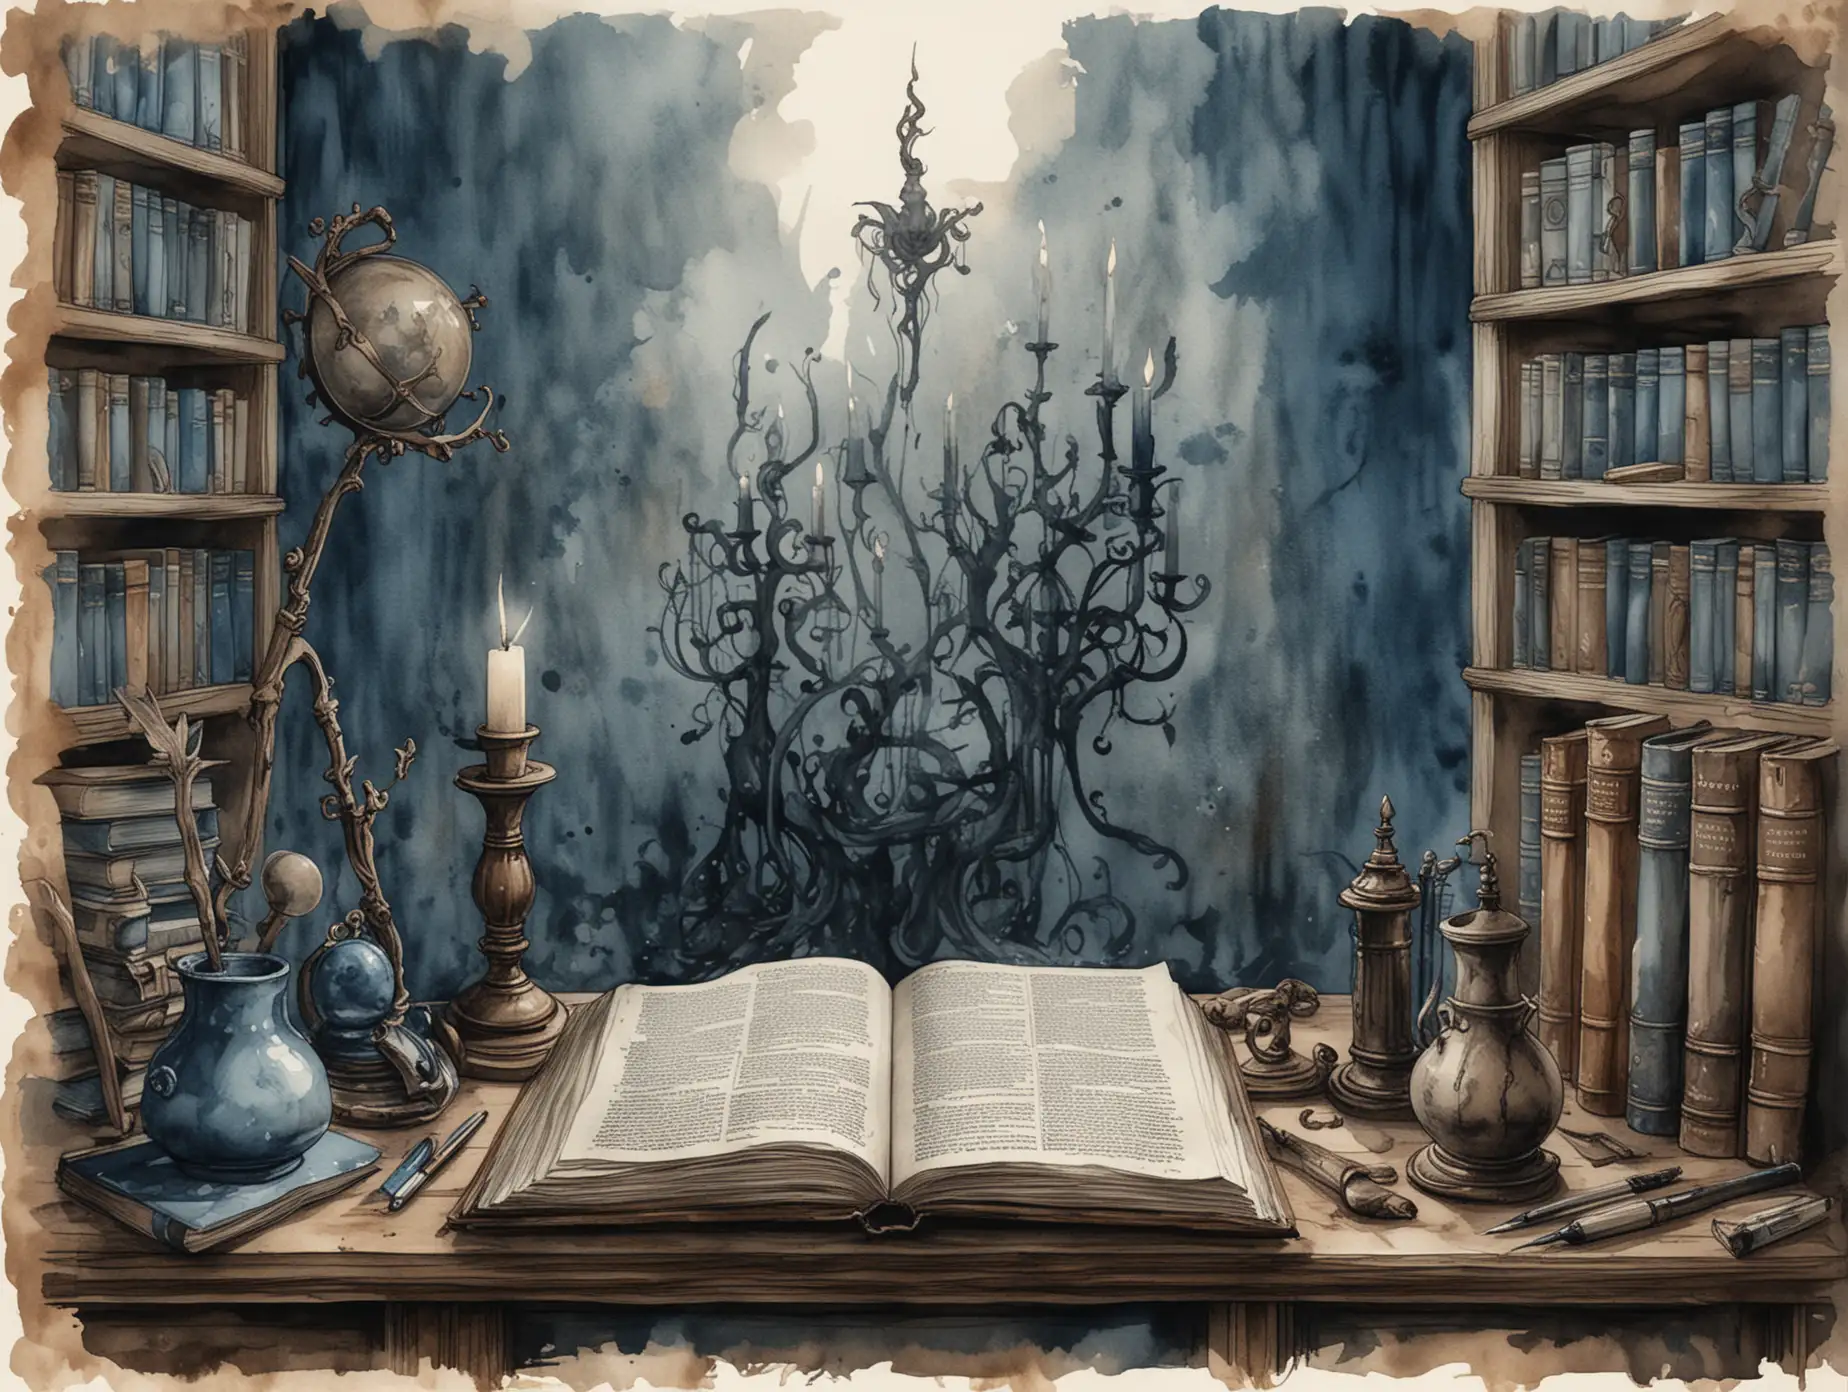 Digital illustration, dark academia, 300dpi, Graphic Art, dark arts library pages, in a blue brown watercolour and ink wash